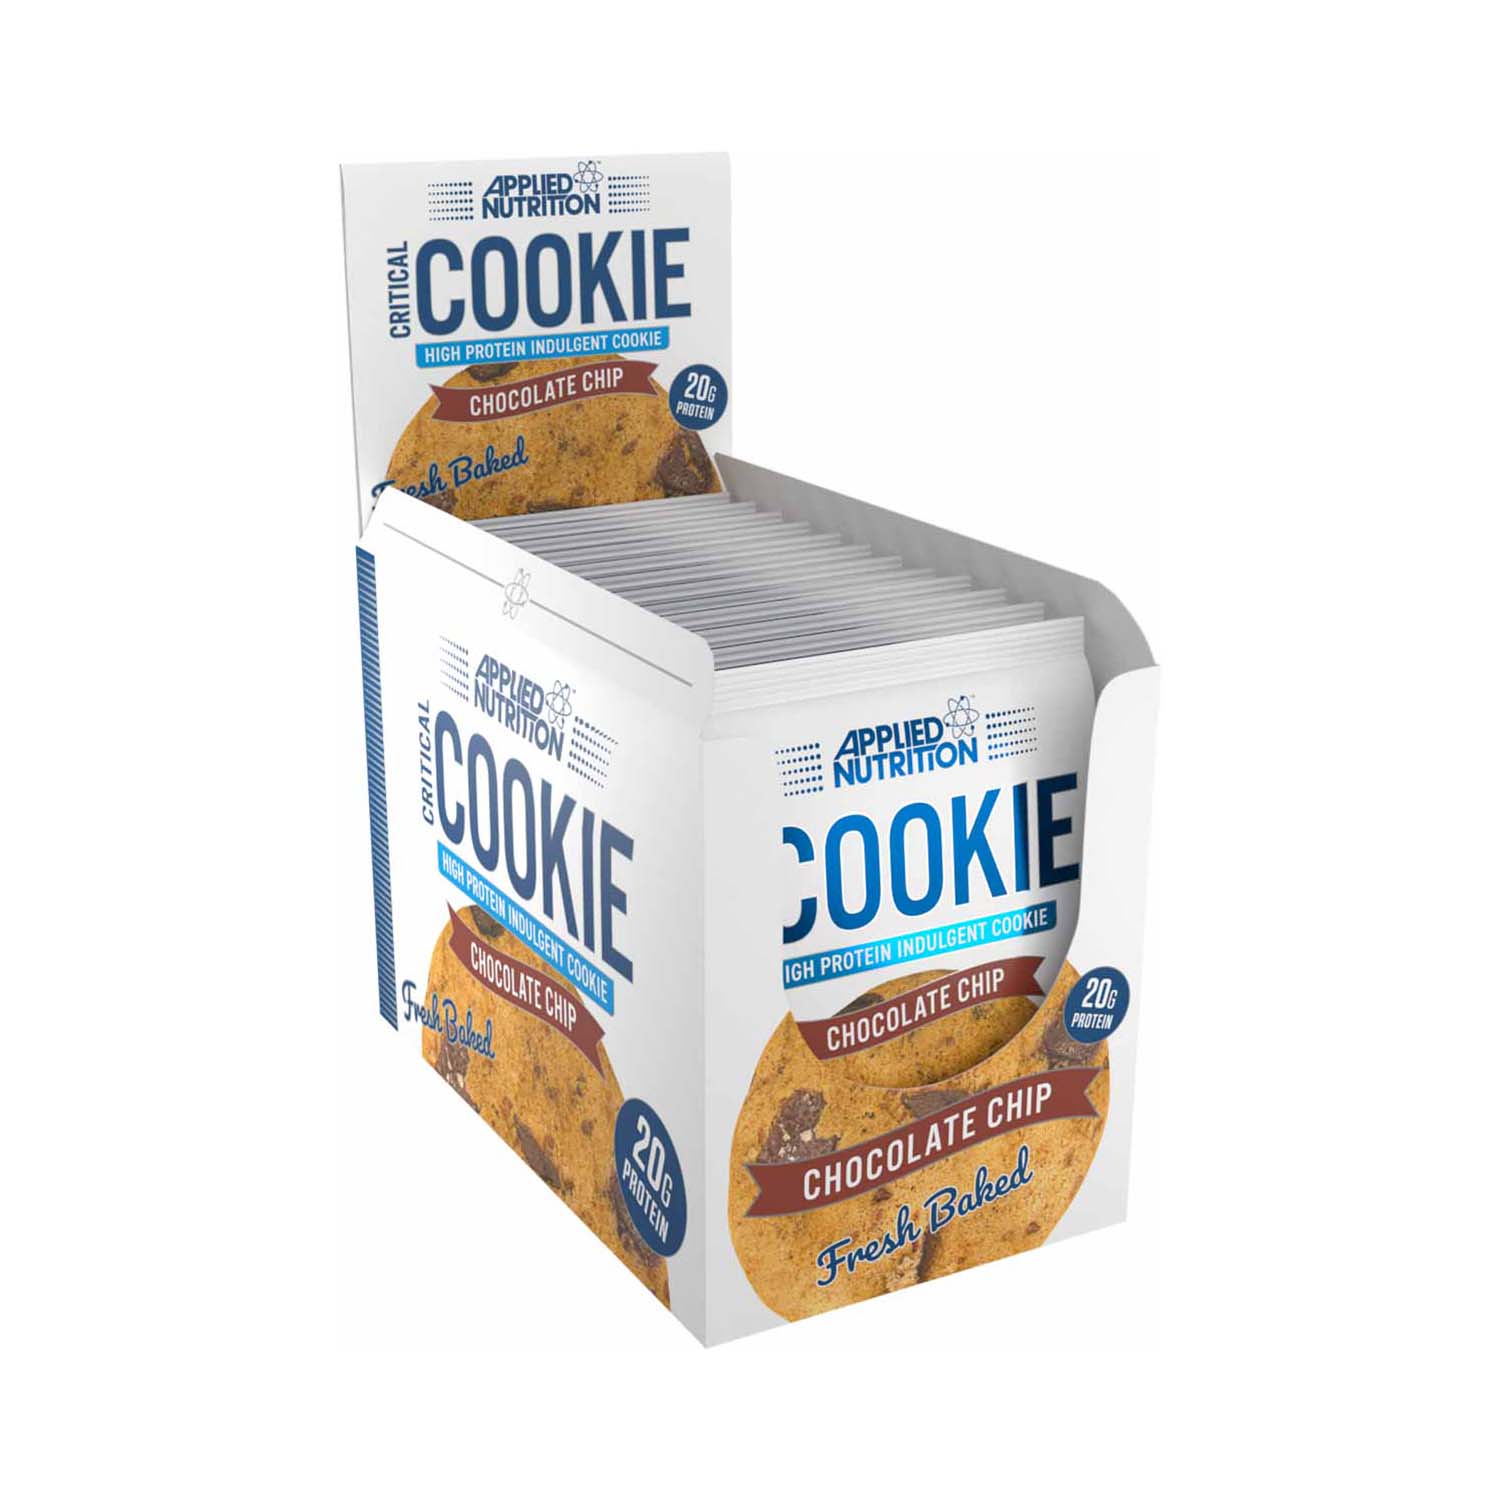 Applied Nutrition Critical Cookie, Chocolate Chip, Box of 12 Pieces